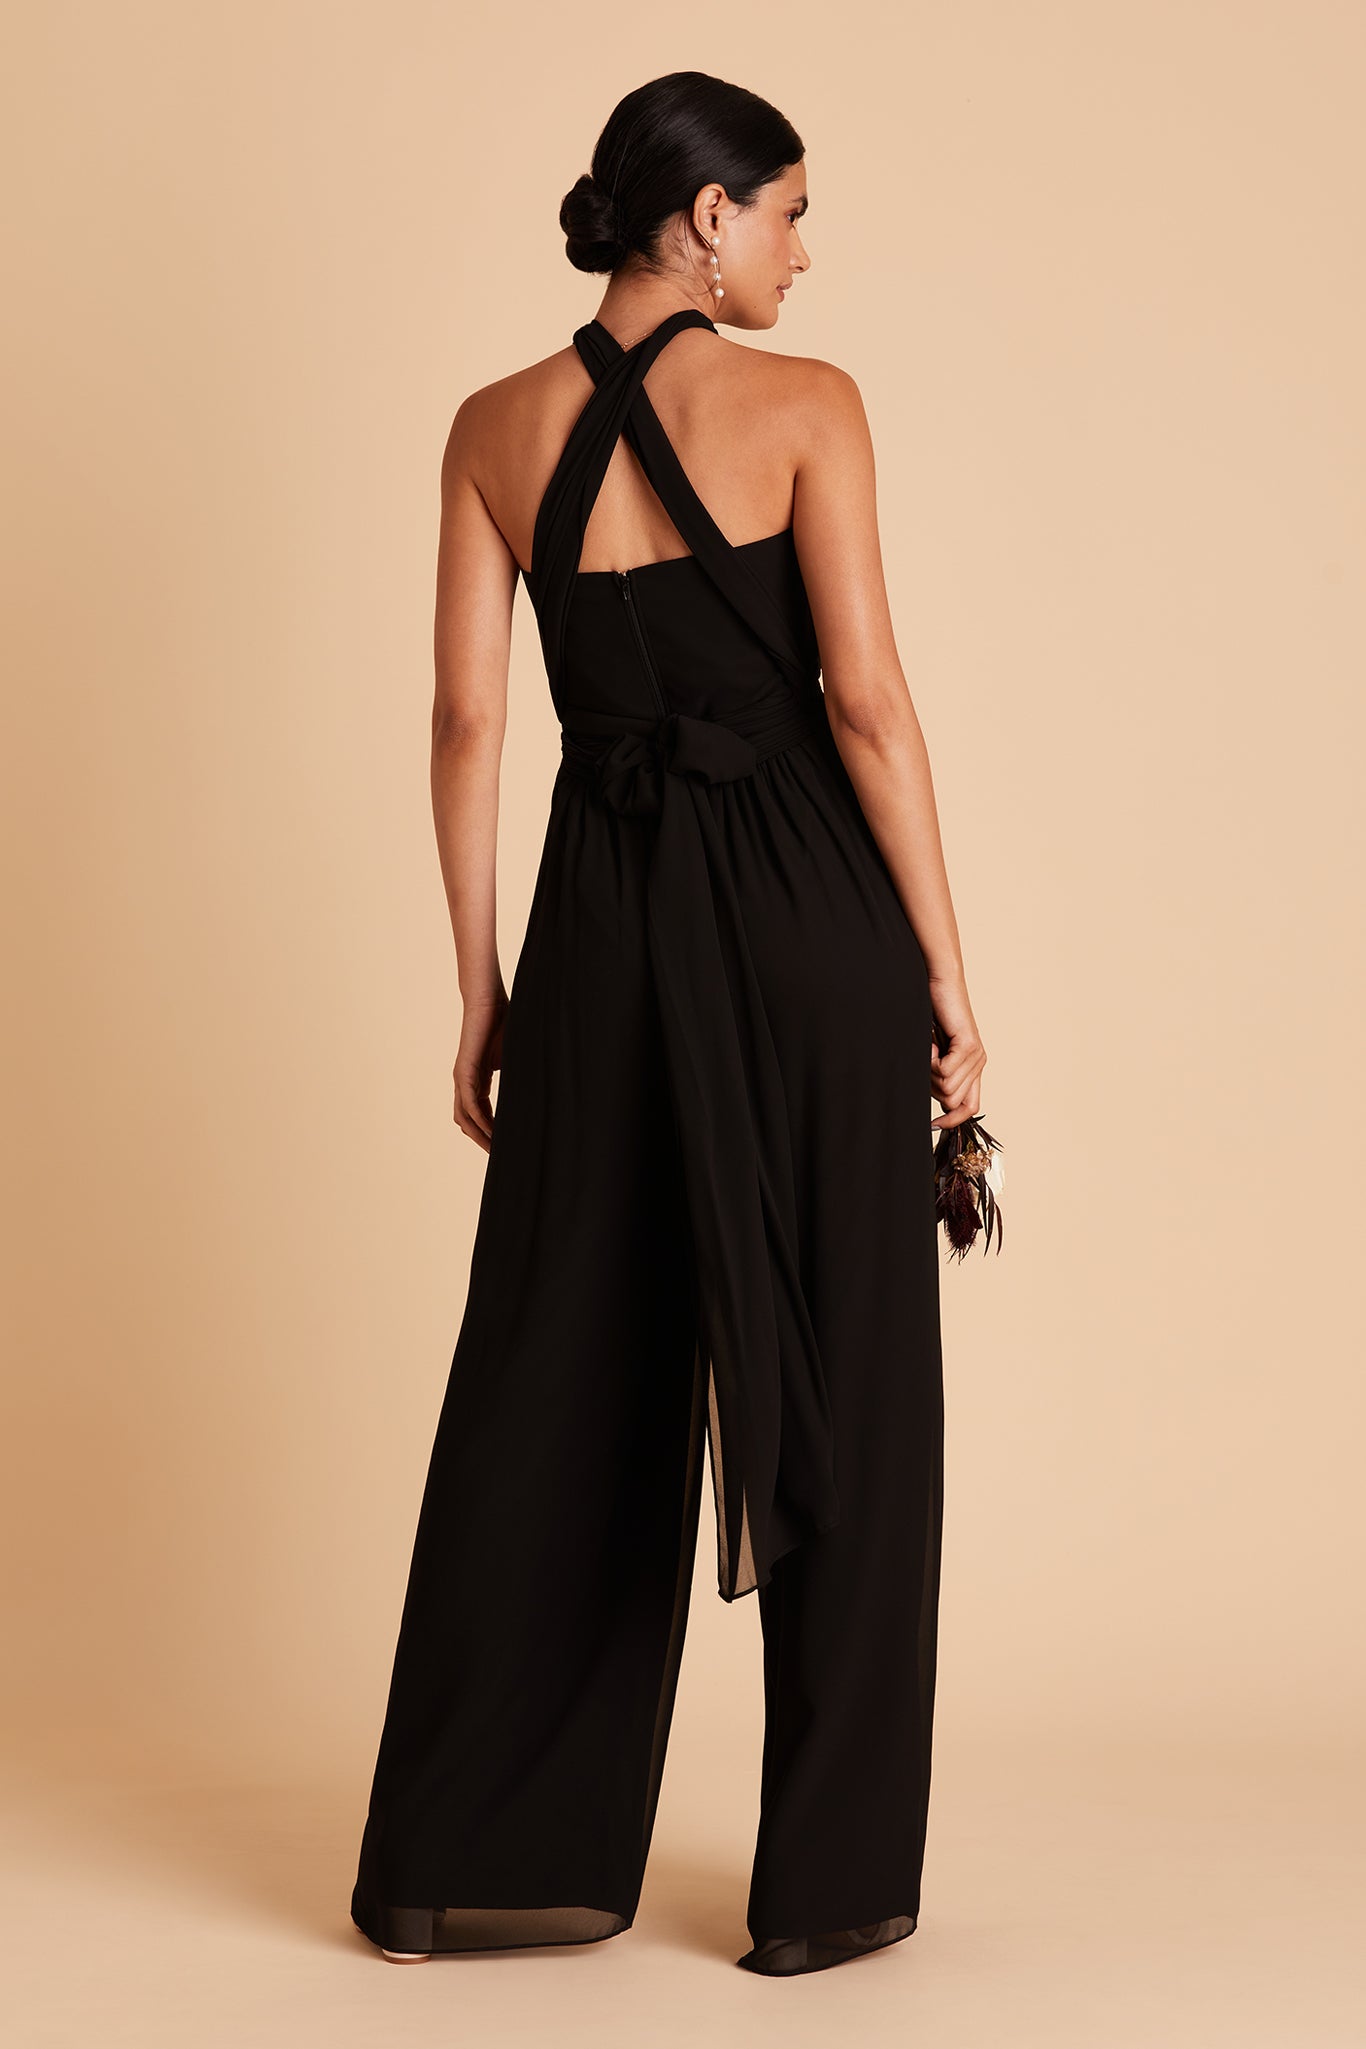 Gigi convertible jumpsuit in black chiffon by Birdy Grey, front view